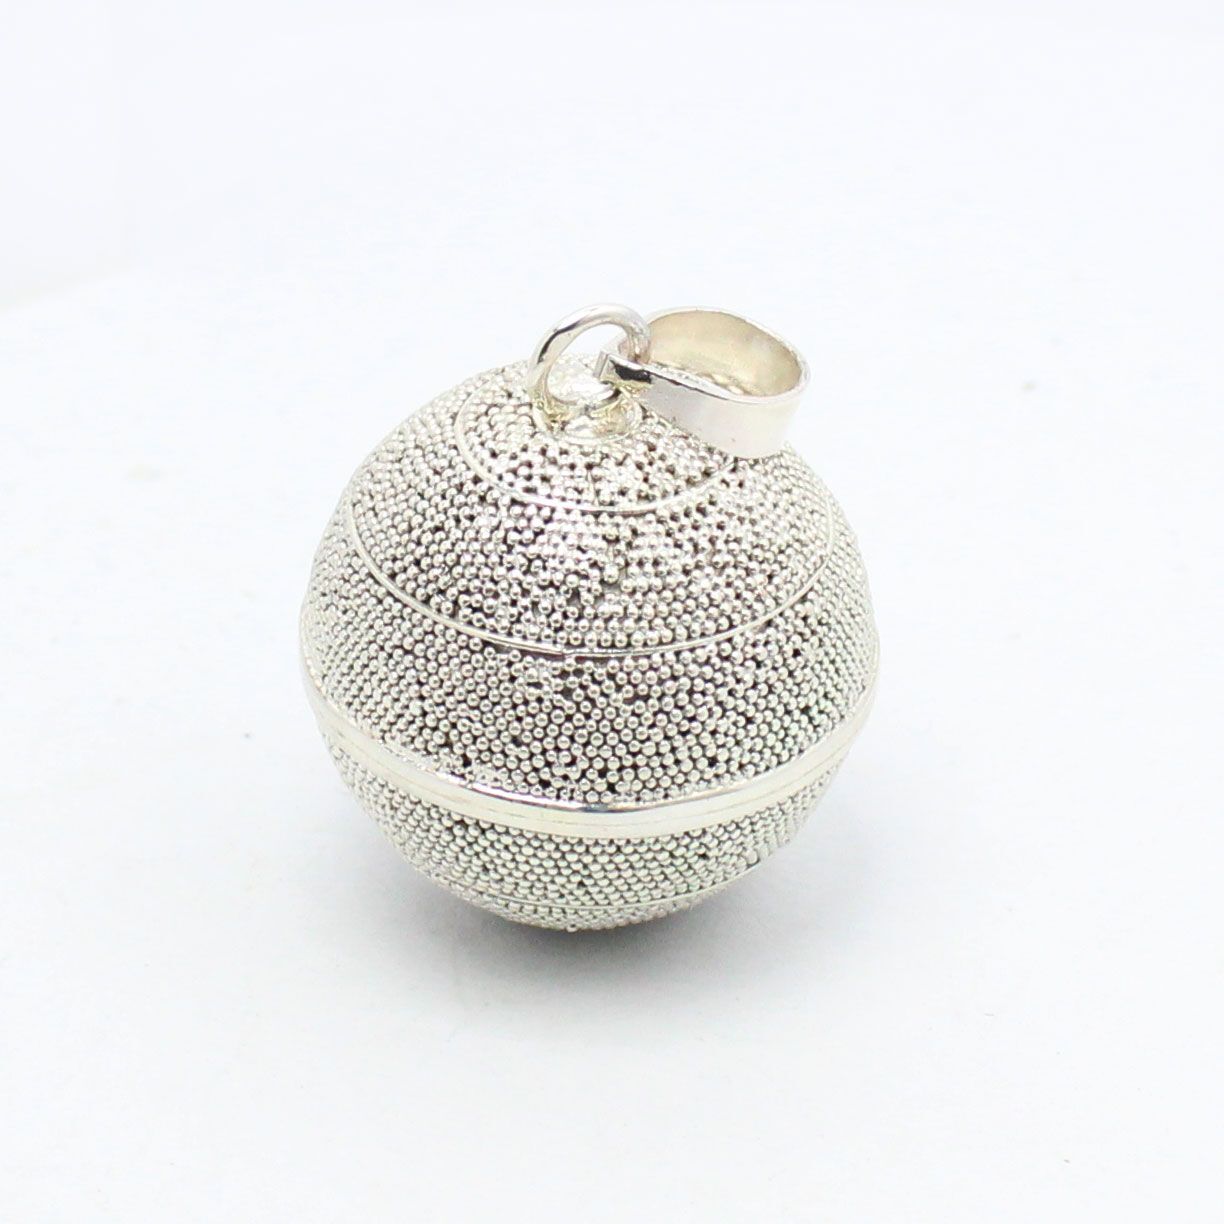 Harmony Ball | Sterling Silver Pendant with chime | Lux